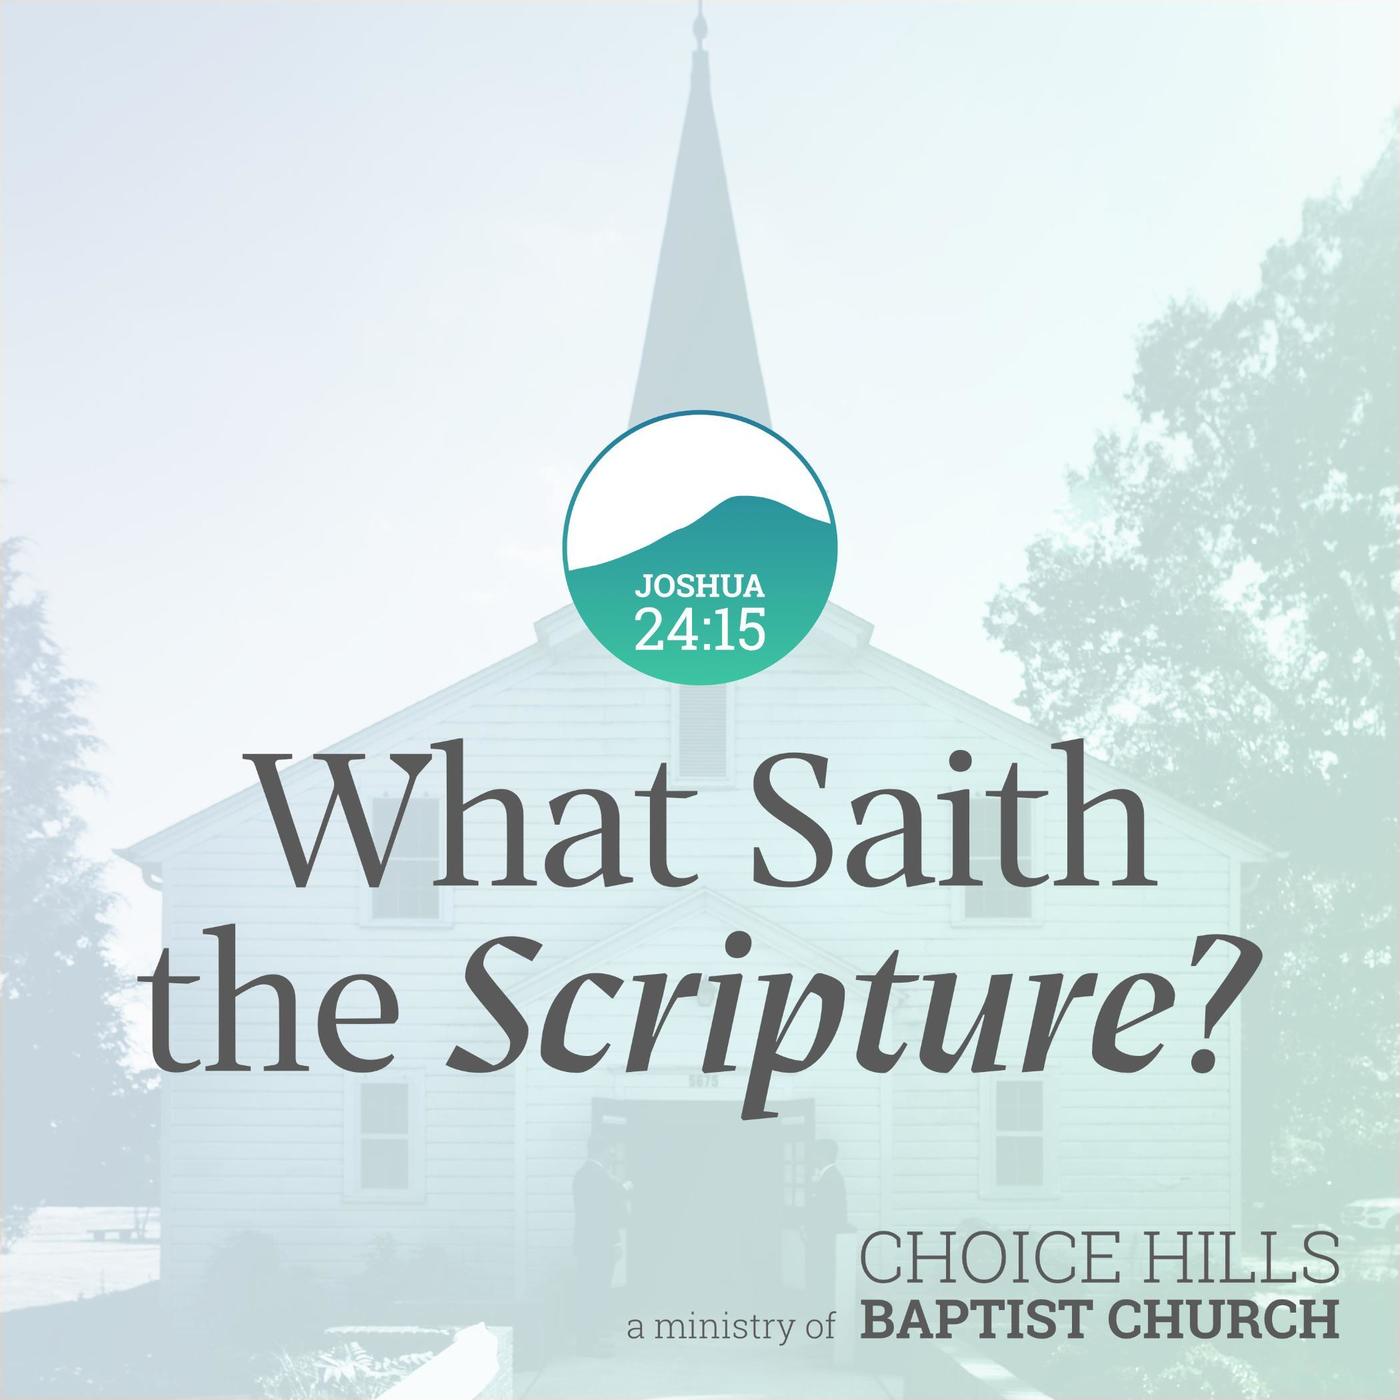 Adult Sunday School: Study of the 119th Psalm (Part 3)